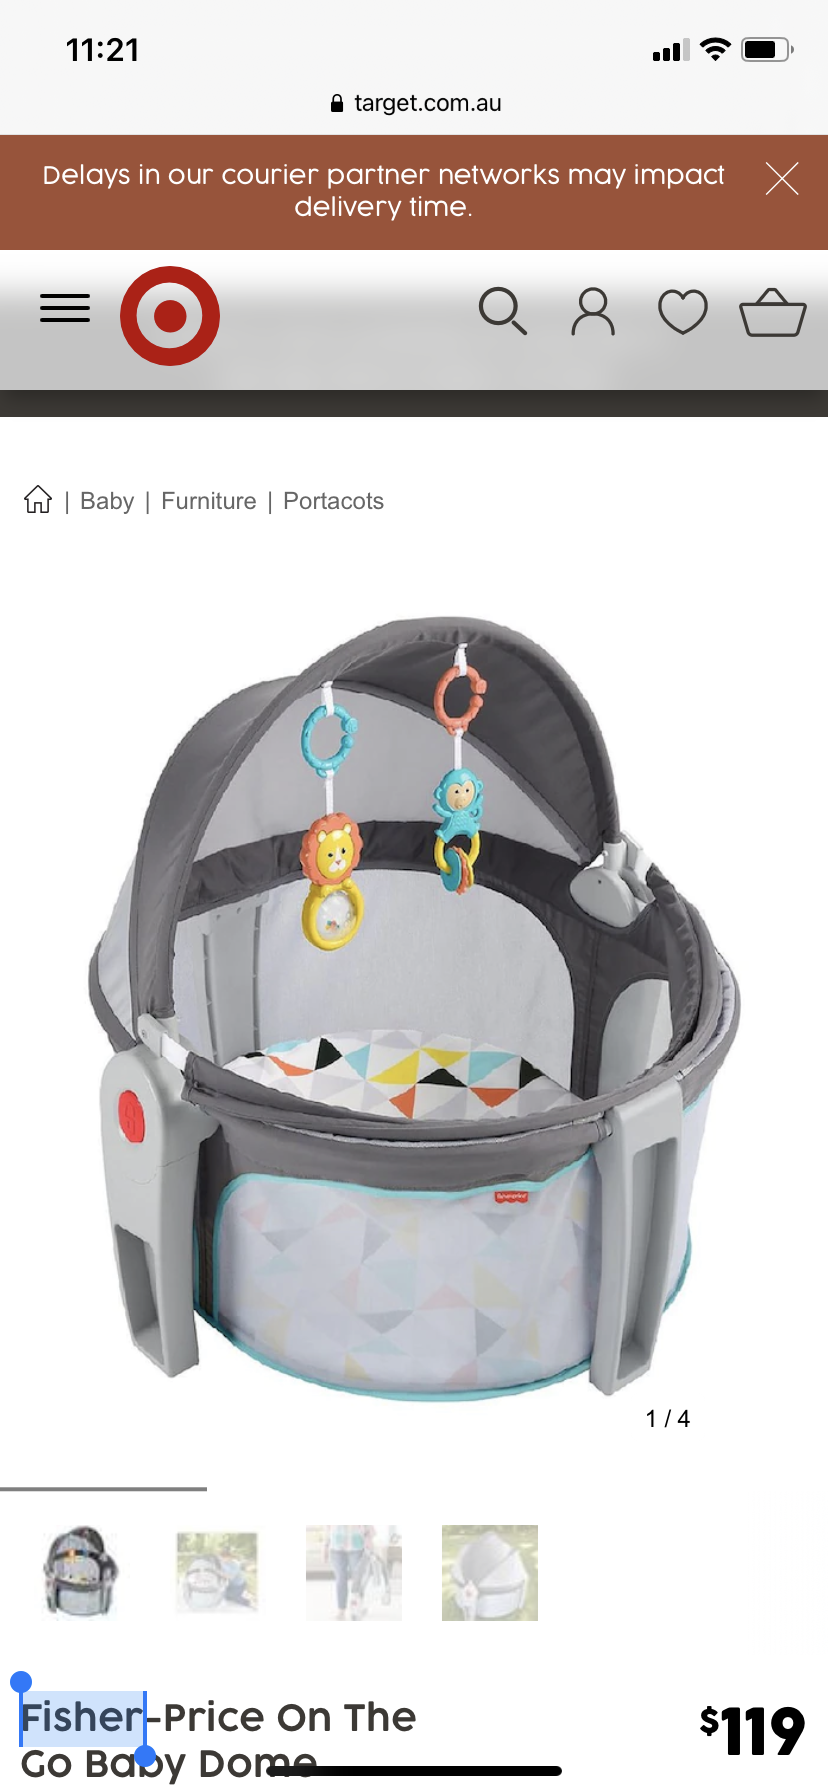 Fisher Price On the Go Baby Dome